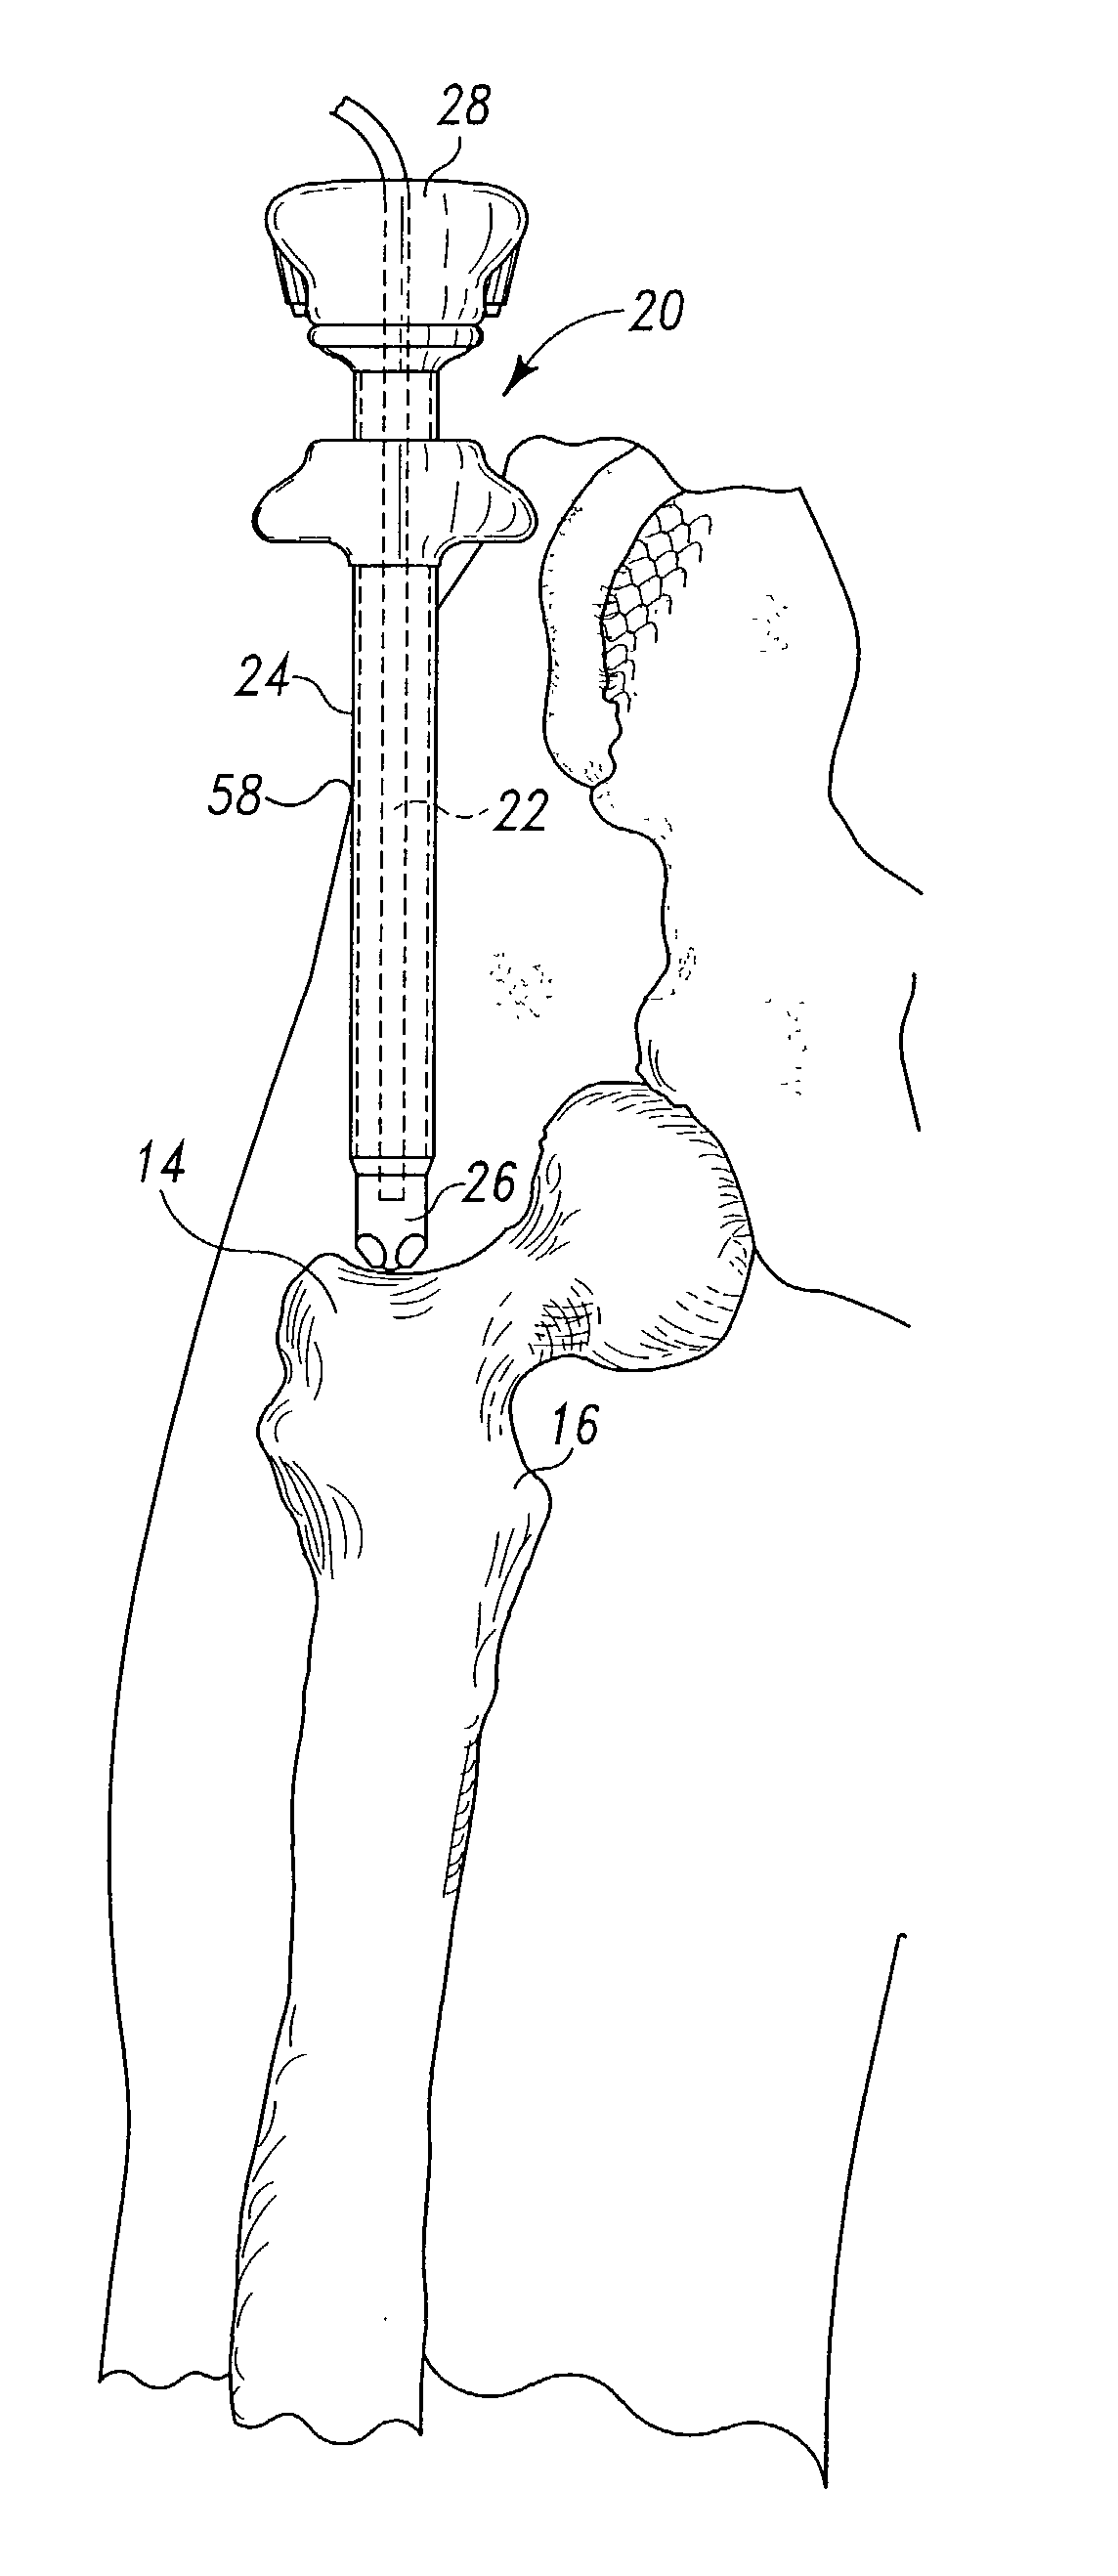 Method and apparatus for use in the performance of endoscopic minimally invasive orthopaedic plating procedures